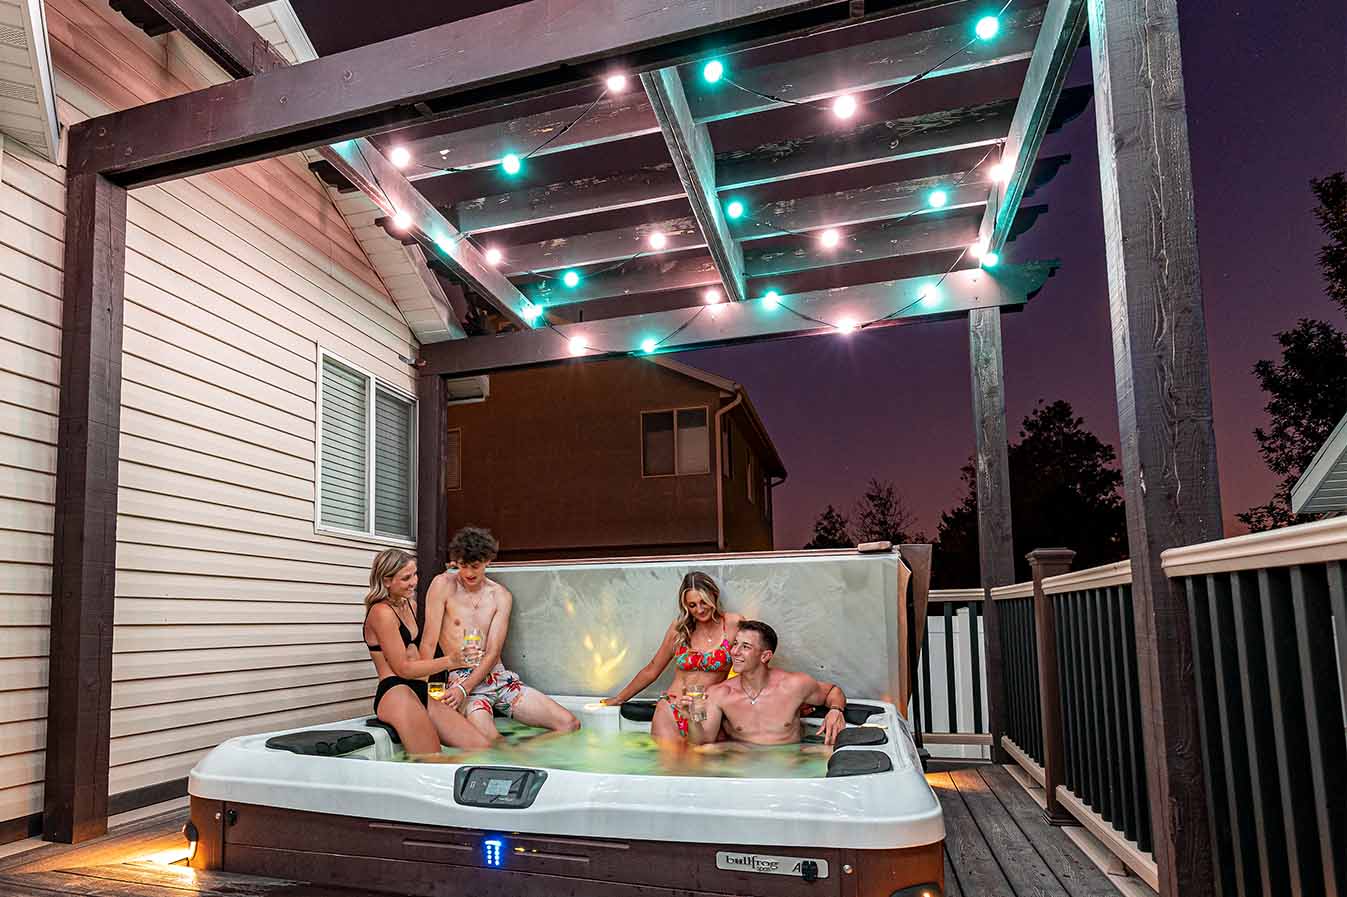 Teens hanging out in a hot tub under globe lights